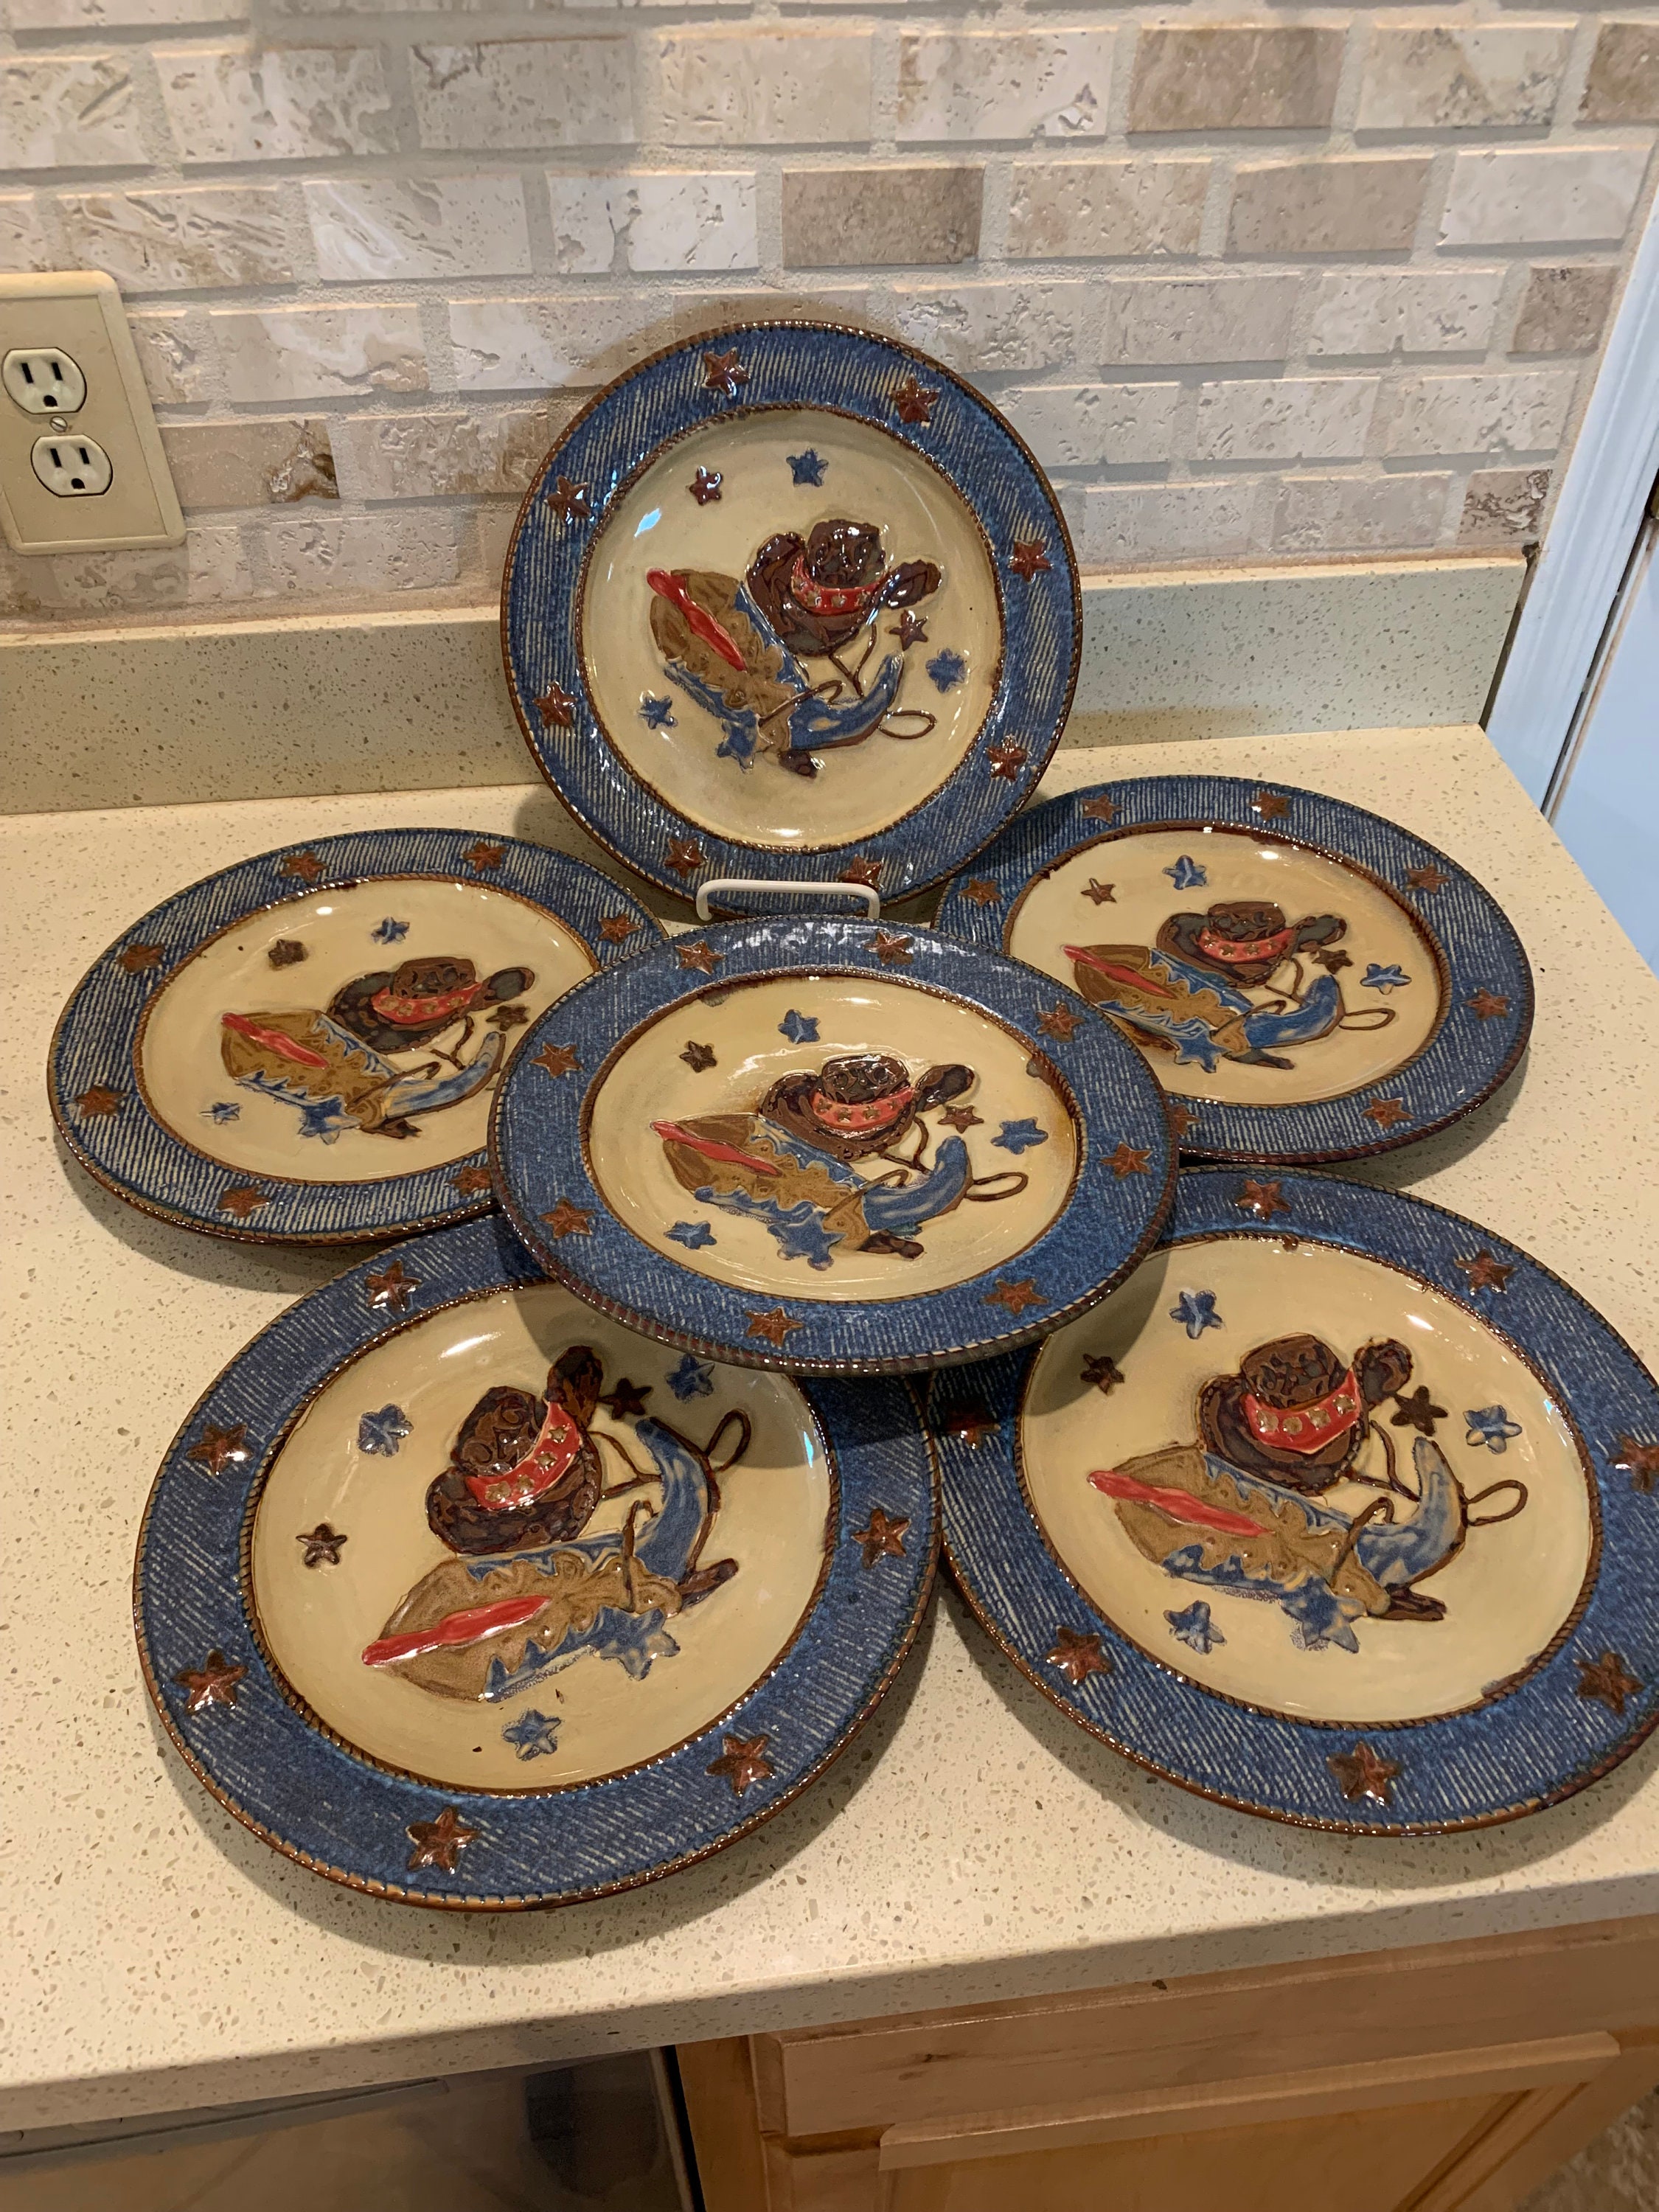 Home Studio Canyon Ranch Collection Set of 2 Dinner Plates Western Style sold in sets of 2